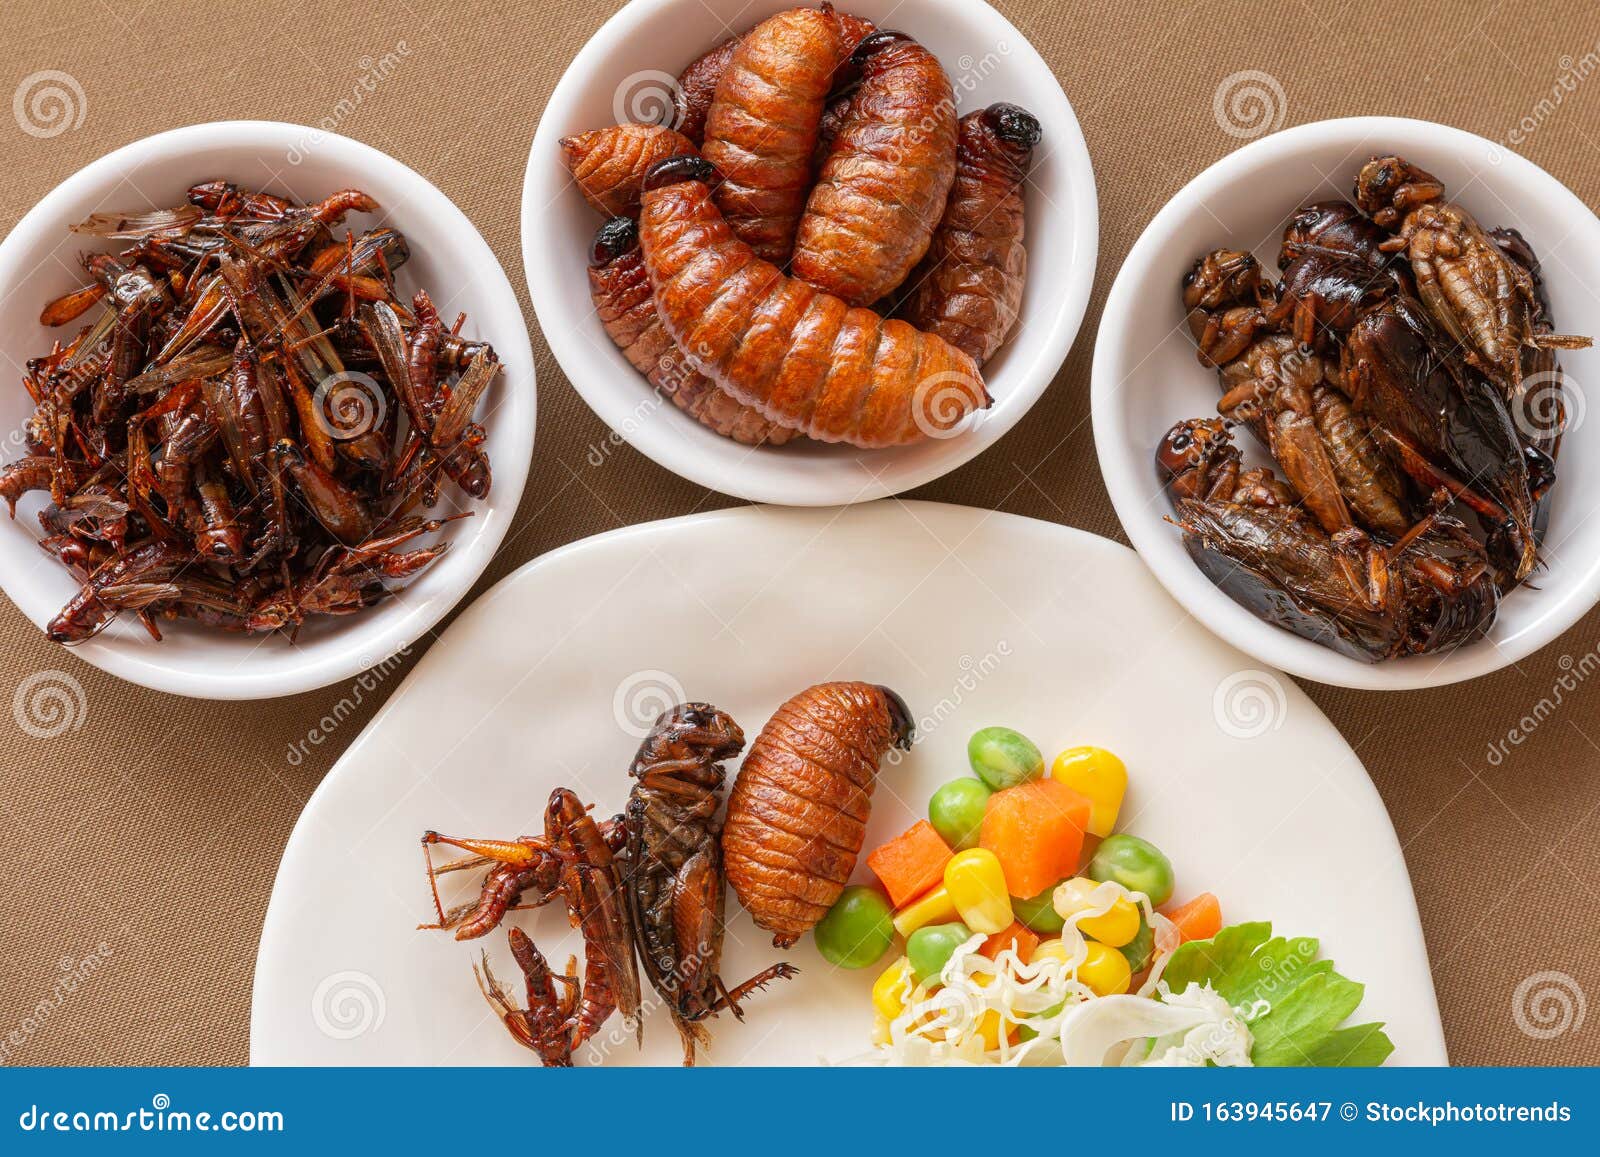 Fried Worm, Insect Food with Vegetable Salad in the White Bowl. Healthy  Meal High Protein Diet Concept Stock Image - Image of medicine, dipping:  163945647